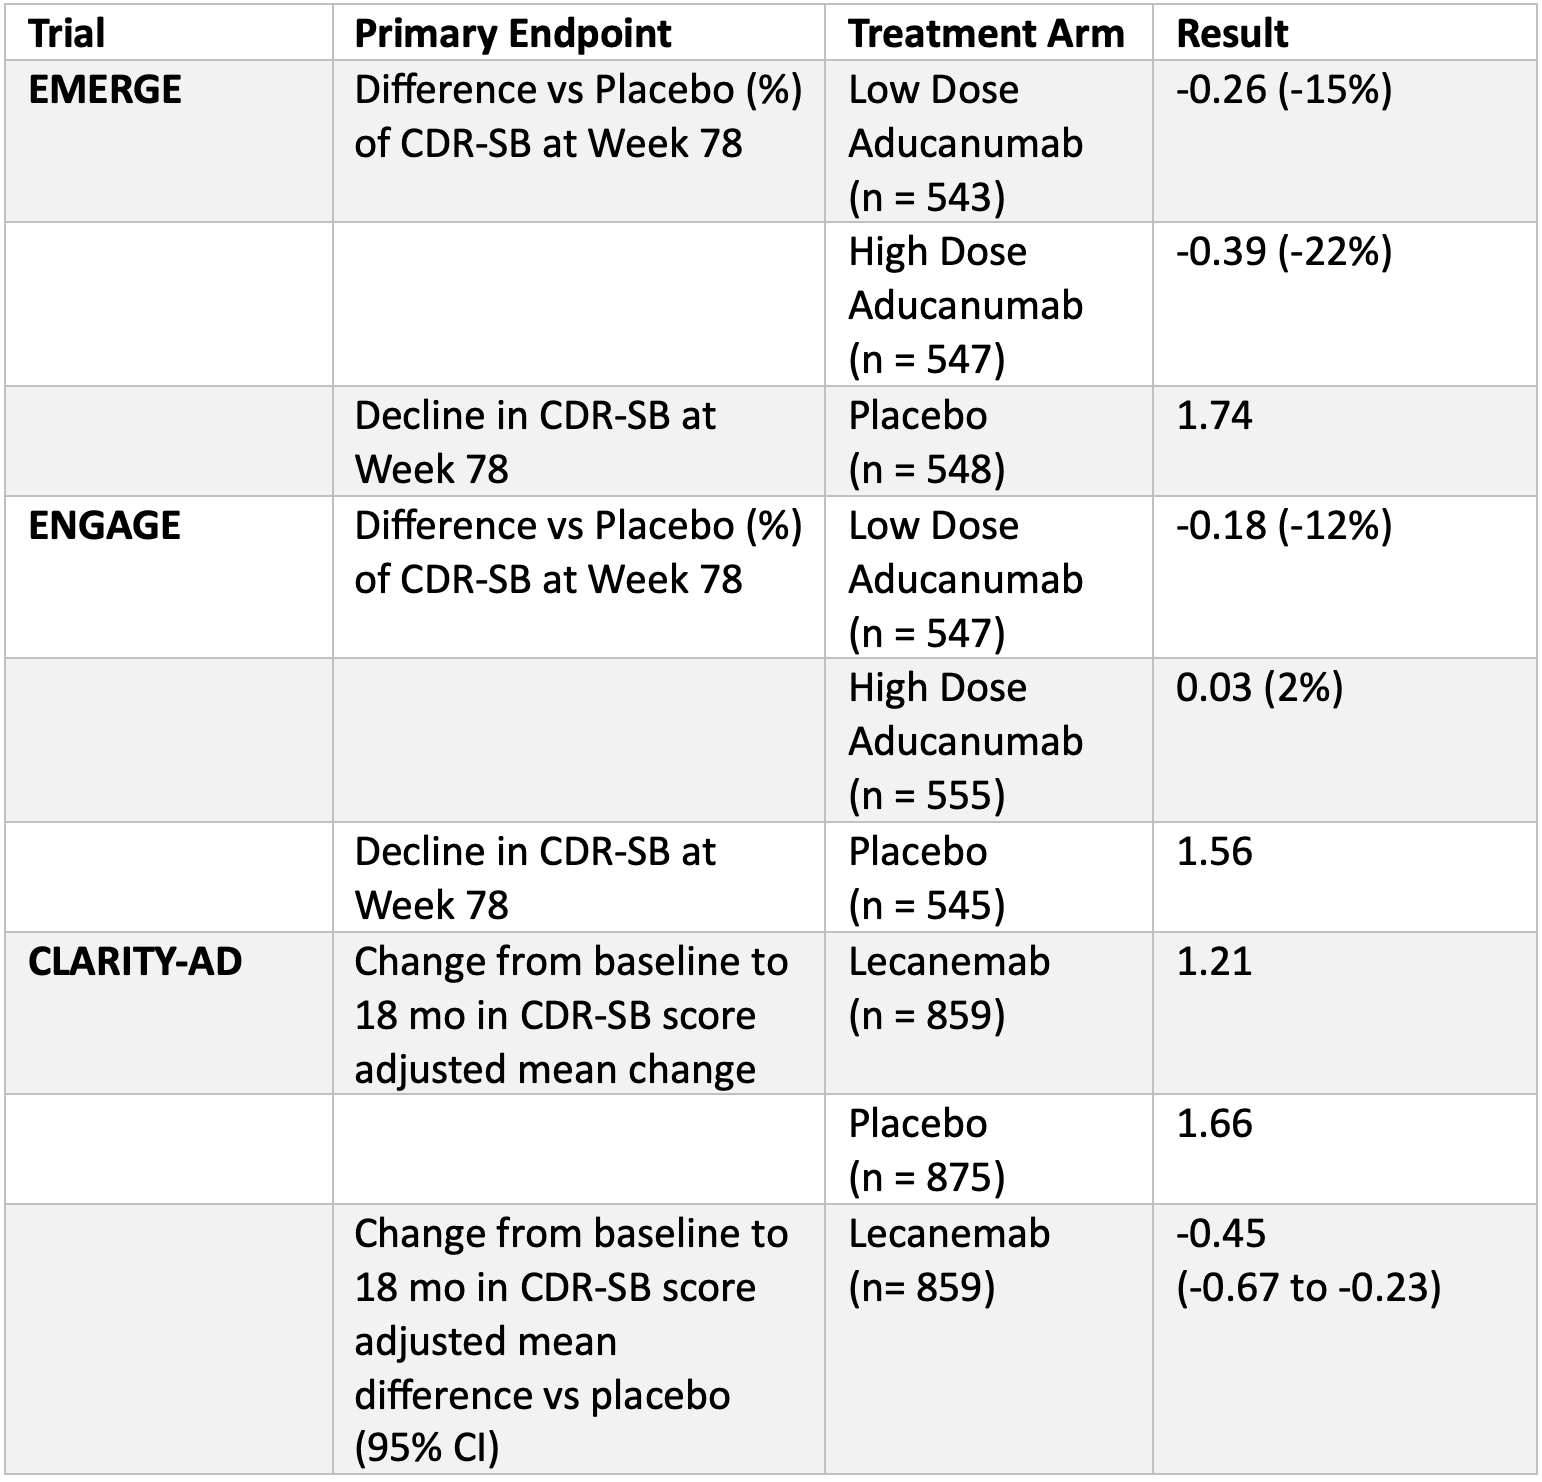 Table 1. Comparison of Primary Endpoints for Aducanumab and Lecanemab Trials